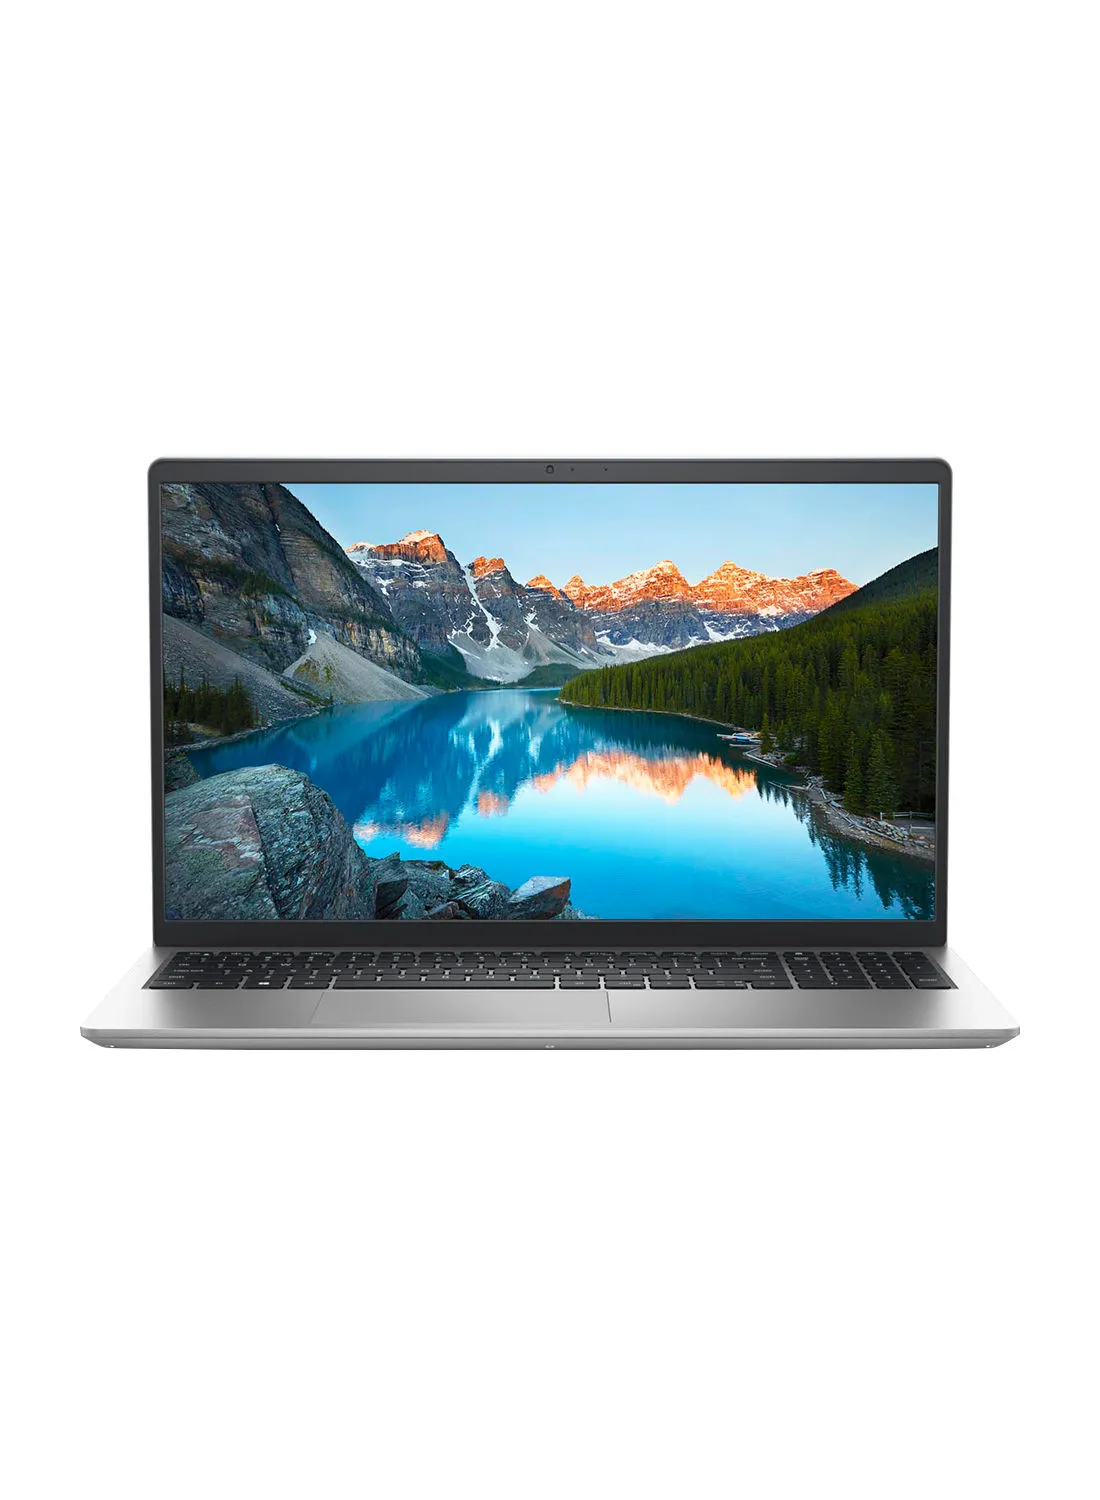 DELL Inspiron 3511 Laptop With 15.6-Inch Display, Core i7-1165G7 Processor / 8GB RAM / 512GB SSD / W11 Home / English Platinum Silver